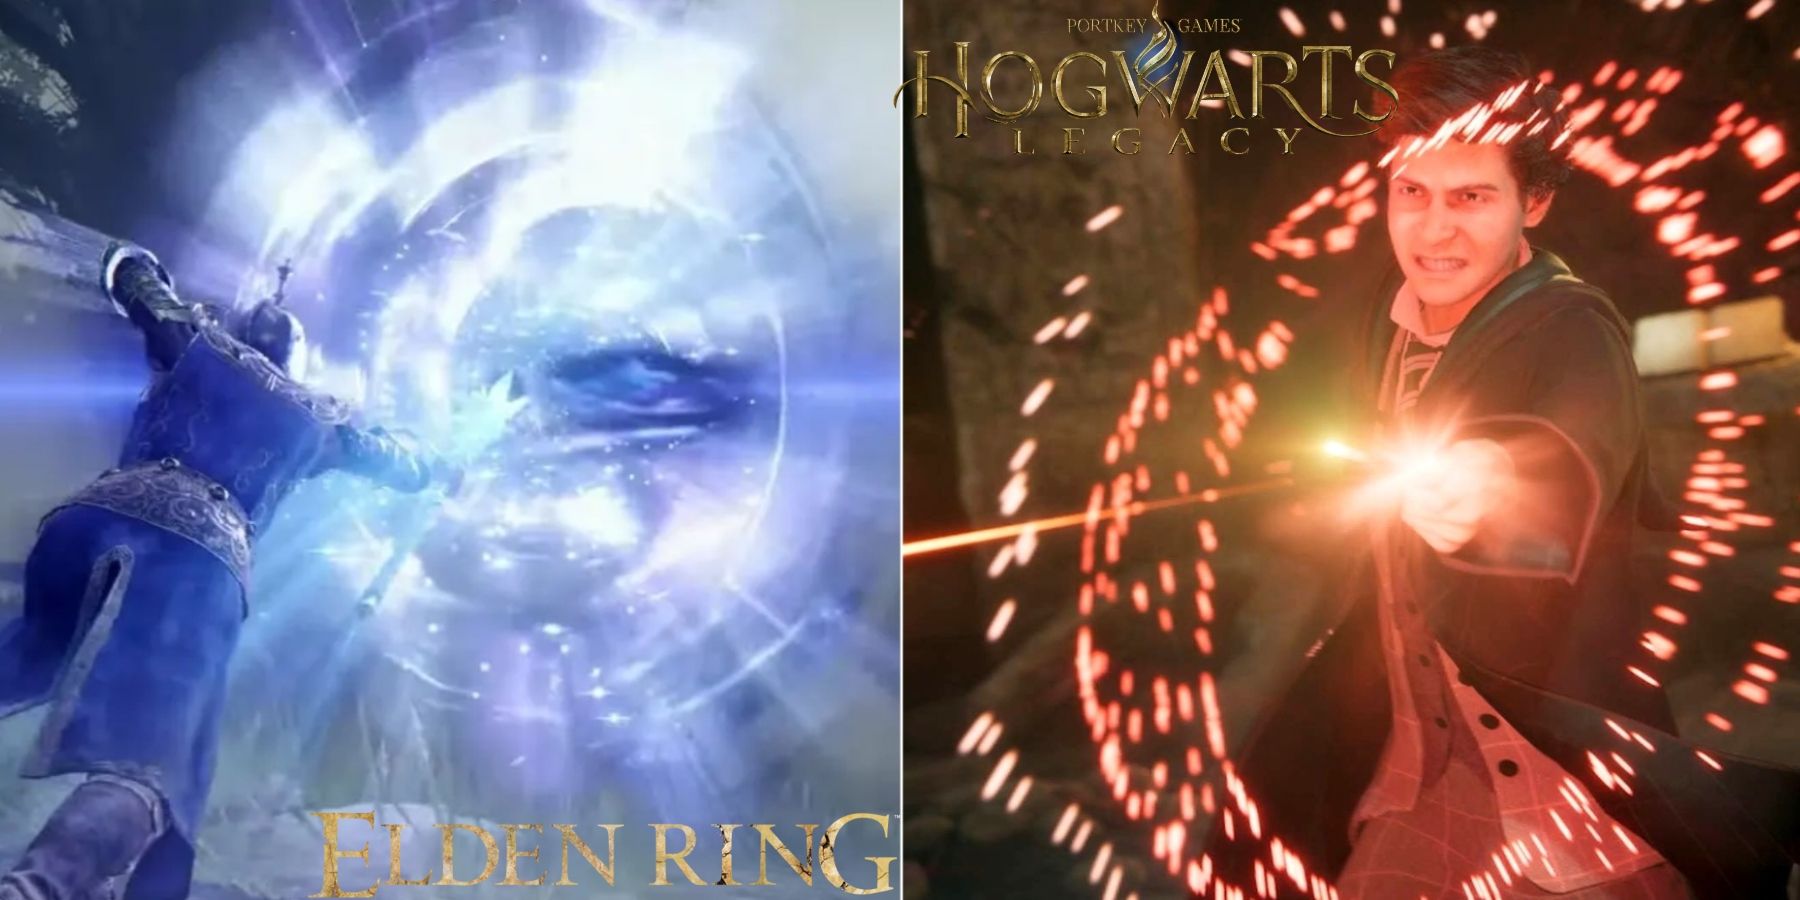 This Elden Ring Hogwarts Legacy Mod Is Impressive and Terrifying